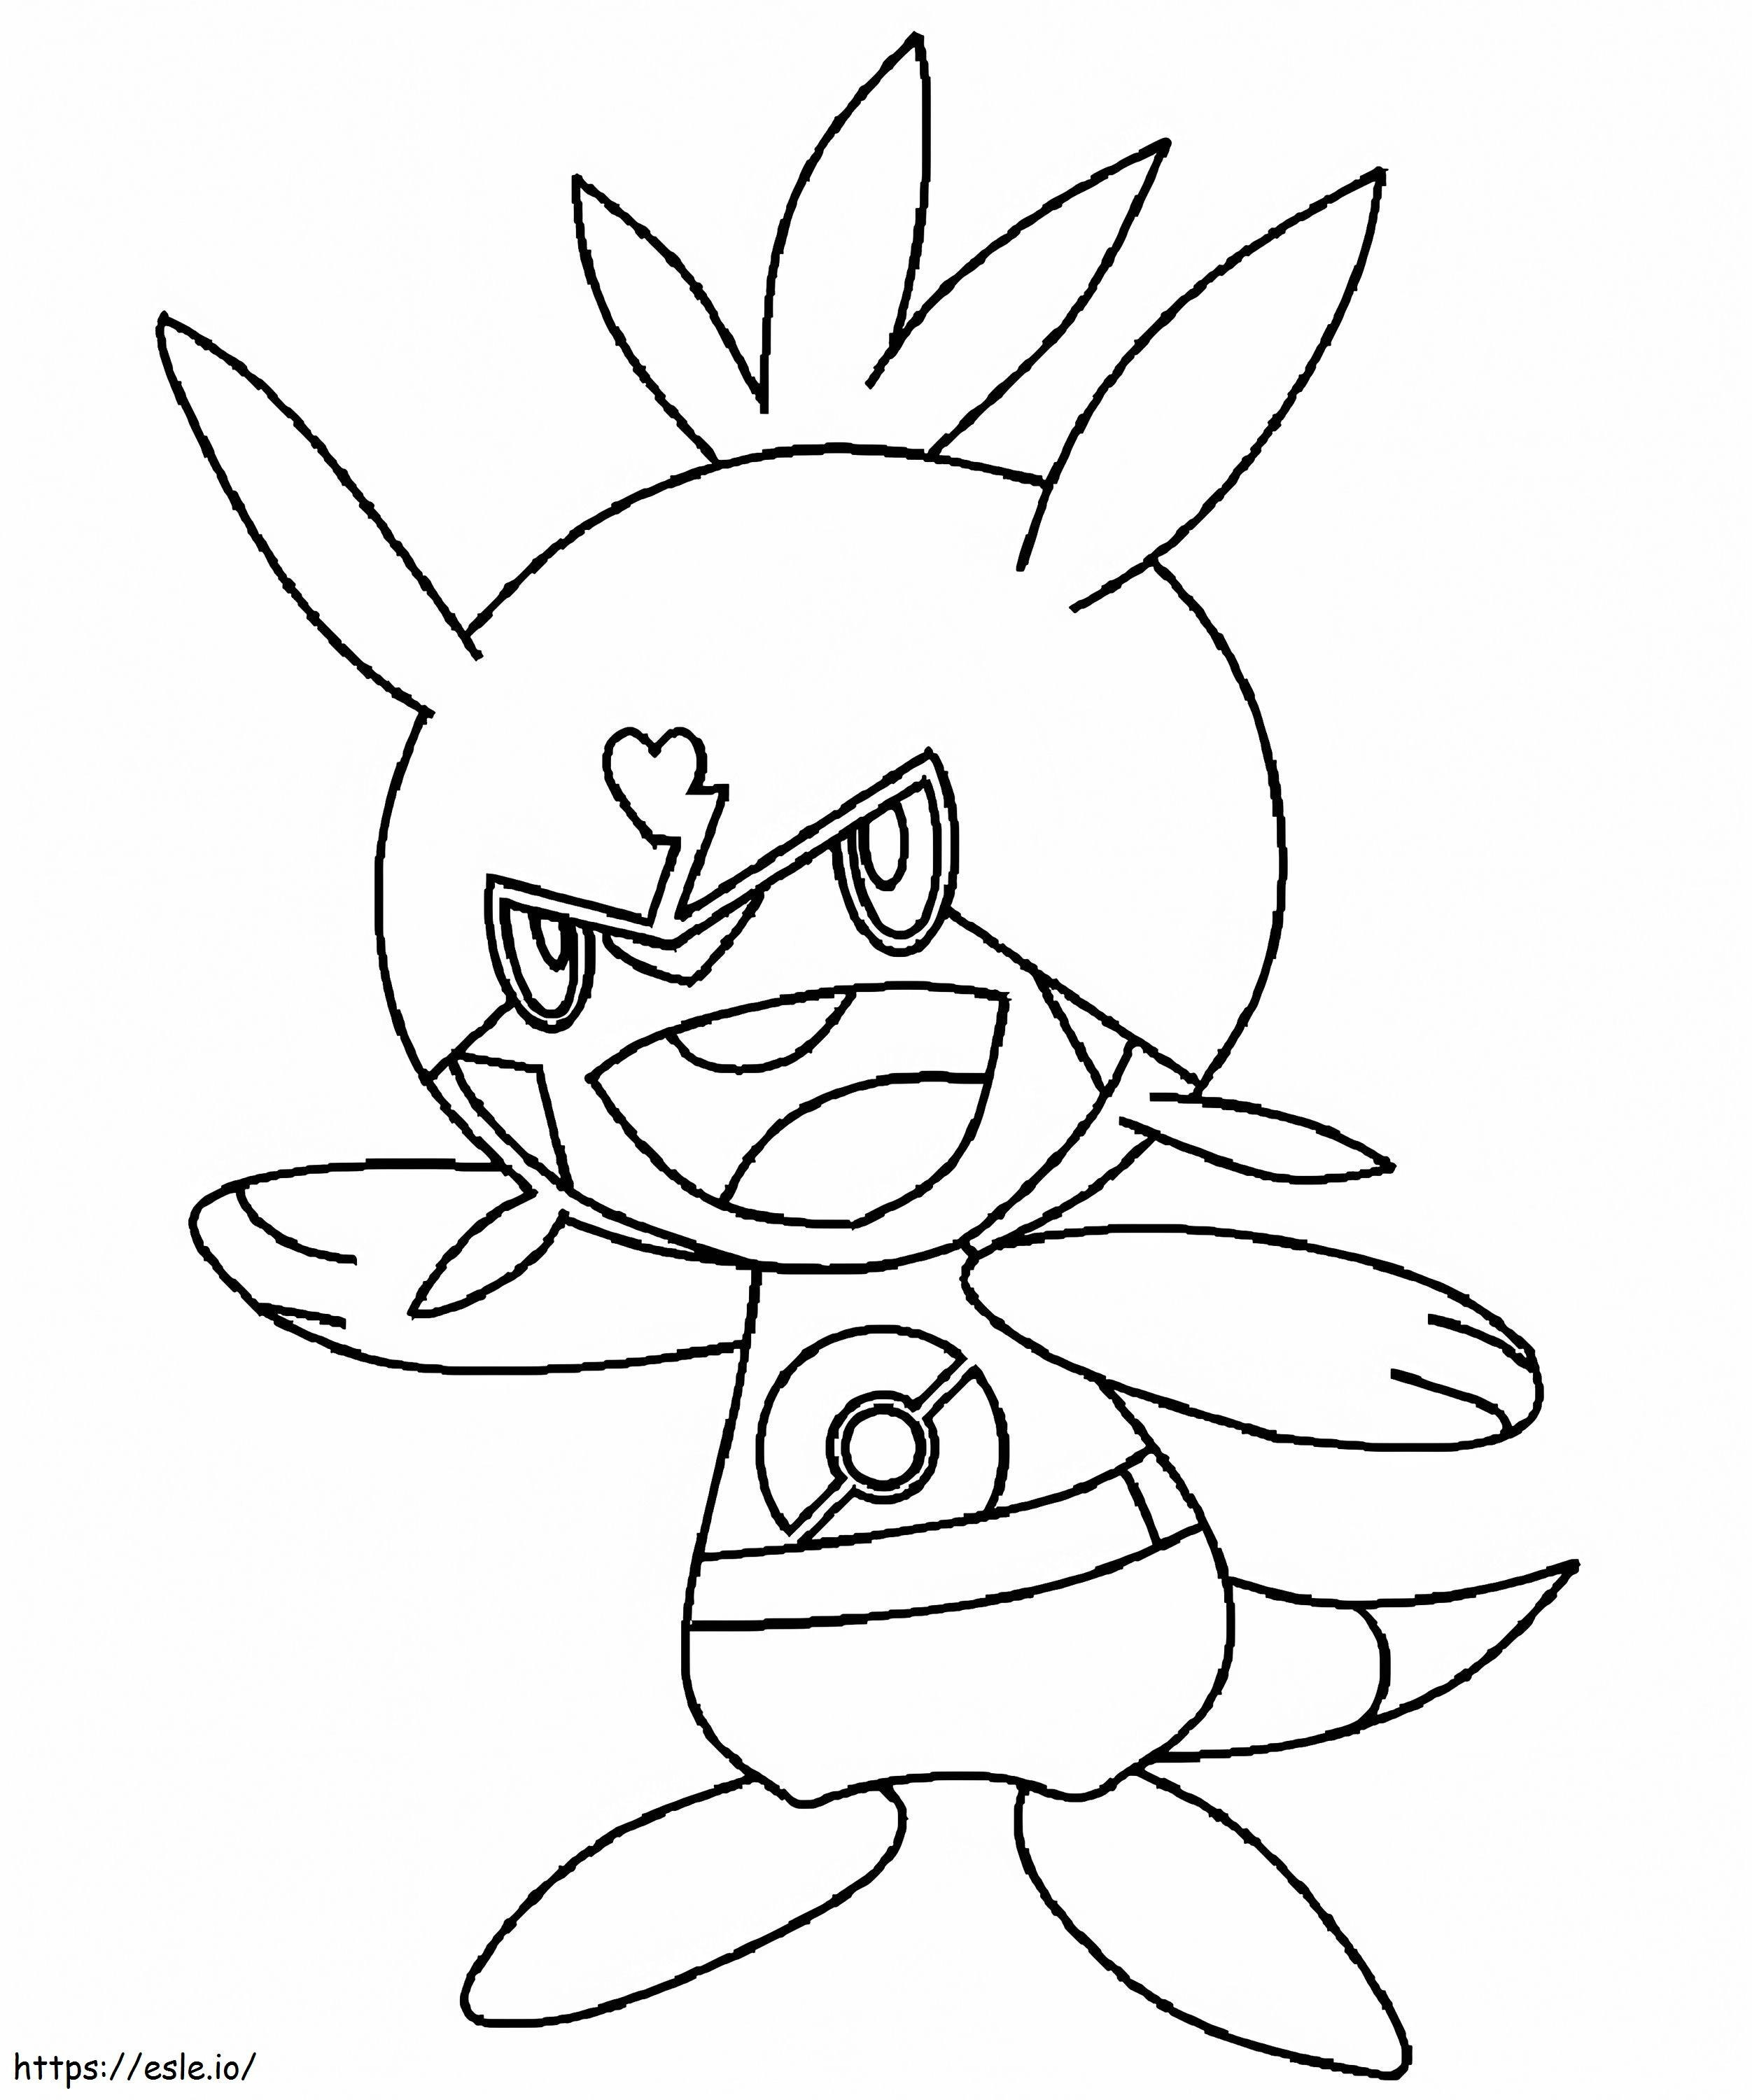 Chespin Pokemon 2 coloring page